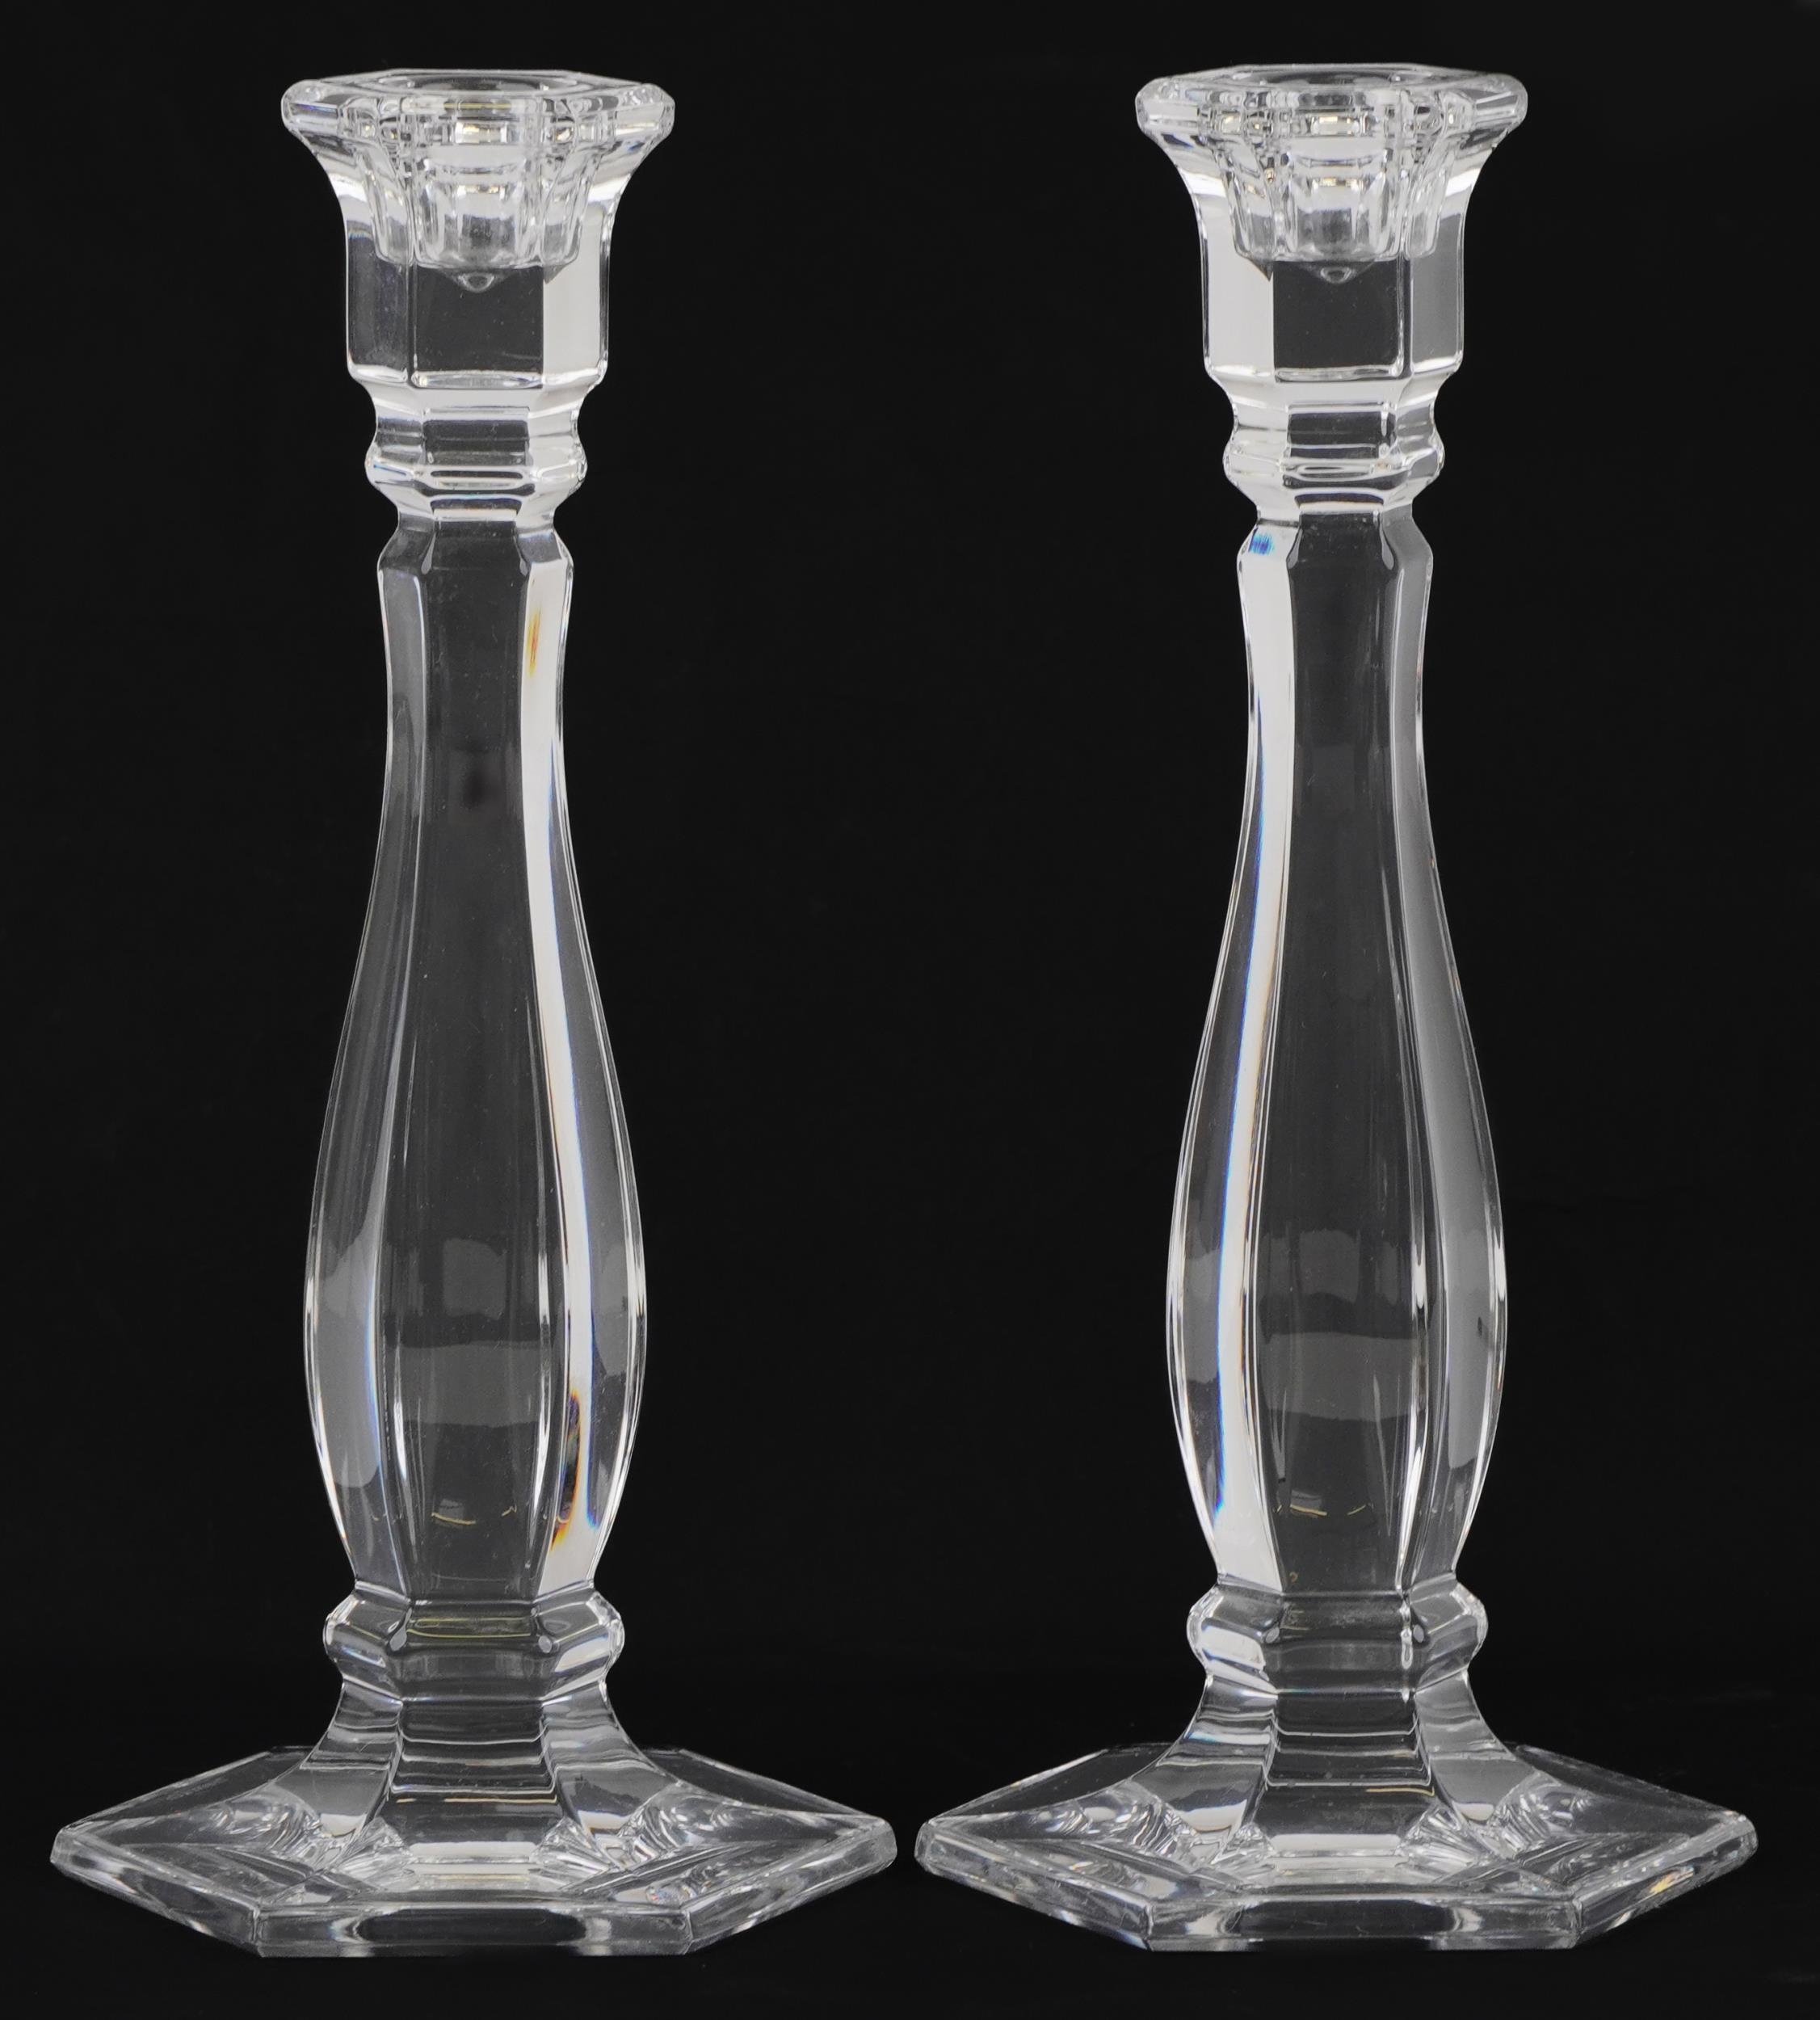 Pair of Tiffany & Co hexagonal glass candlesticks, each 24cm high - Image 2 of 4